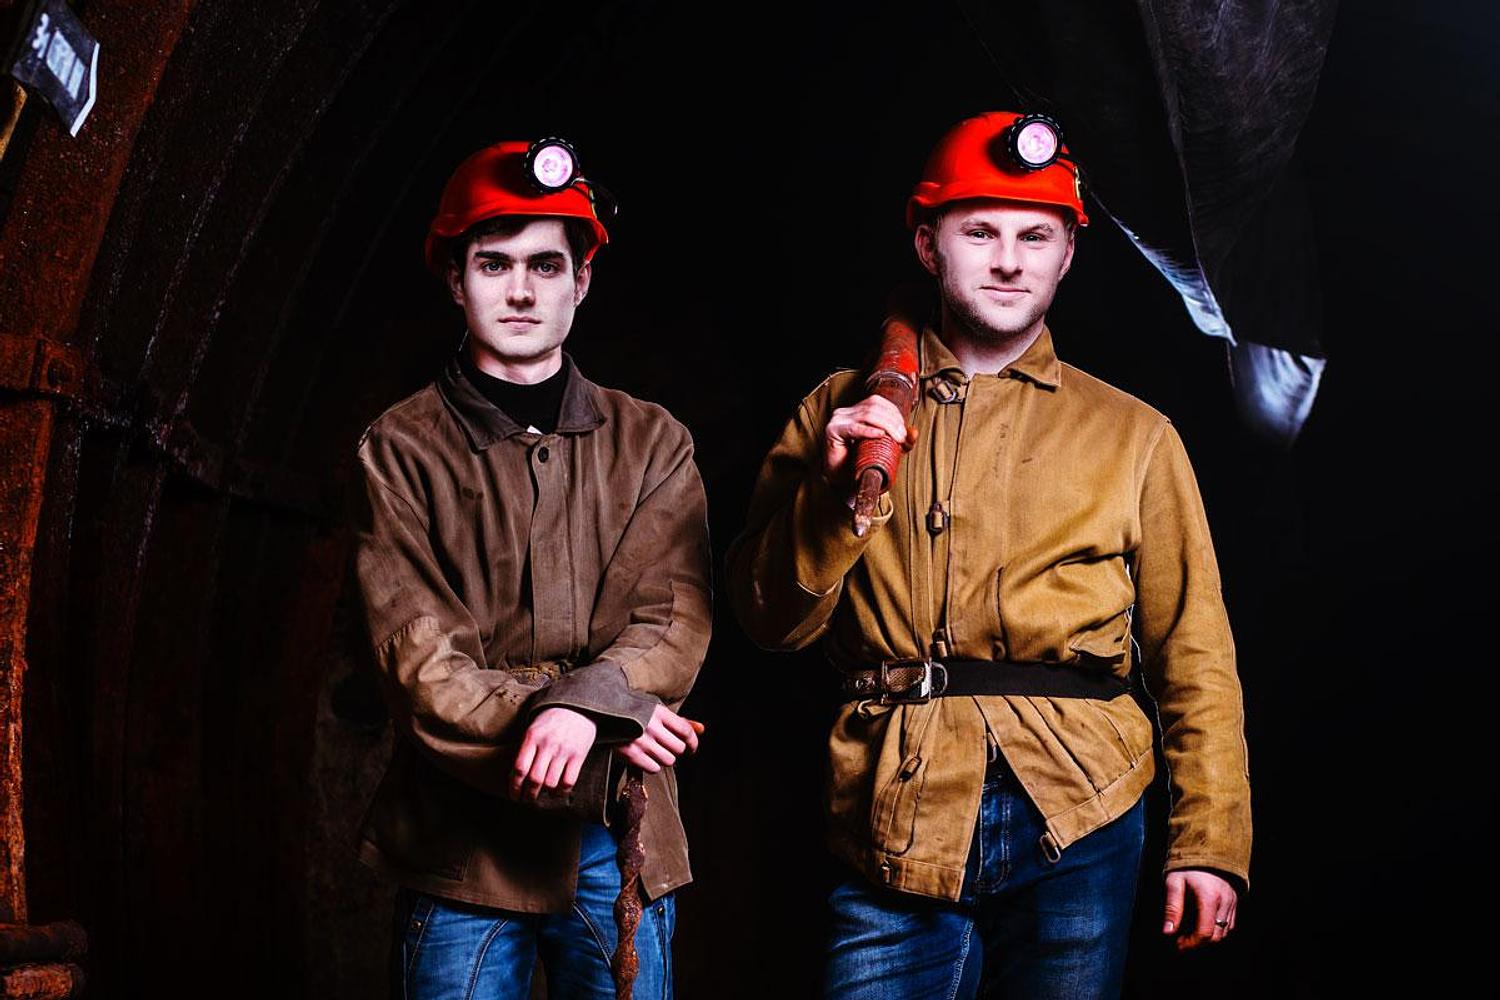 The Two Colins get ready to mine some crypto.